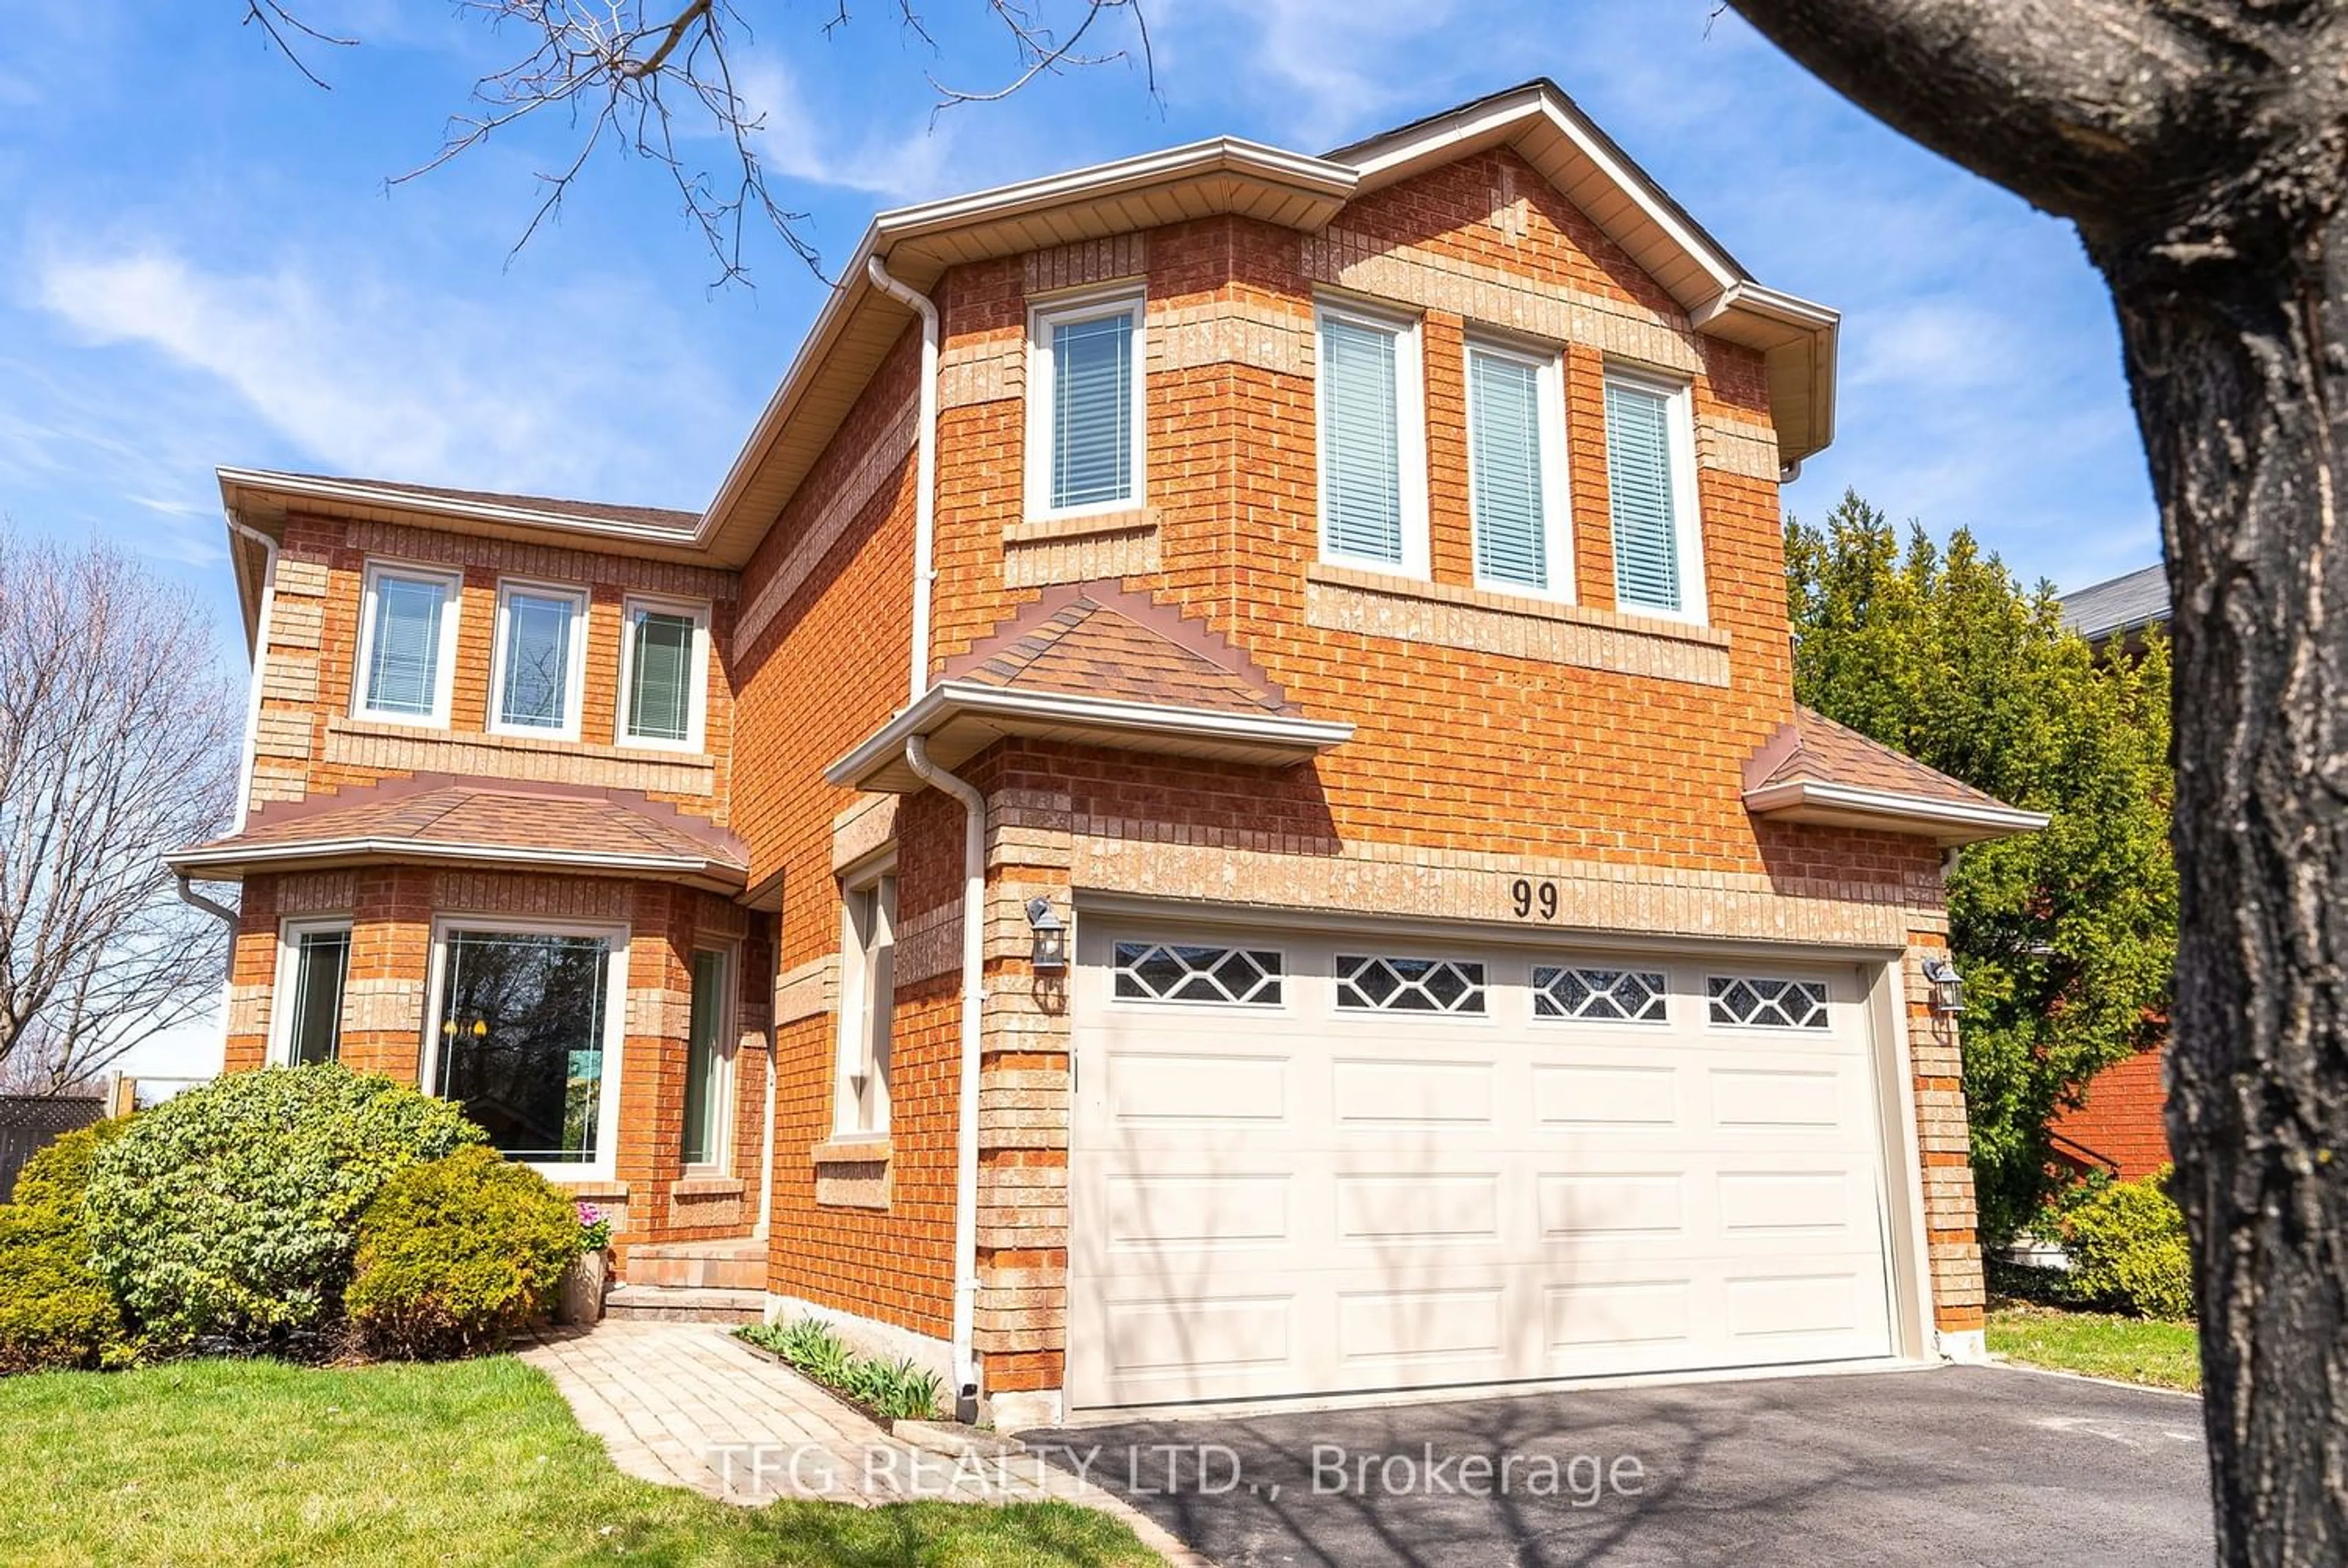 Home with brick exterior material for 99 Fernlea Cres, Oakville Ontario L6H 6B2